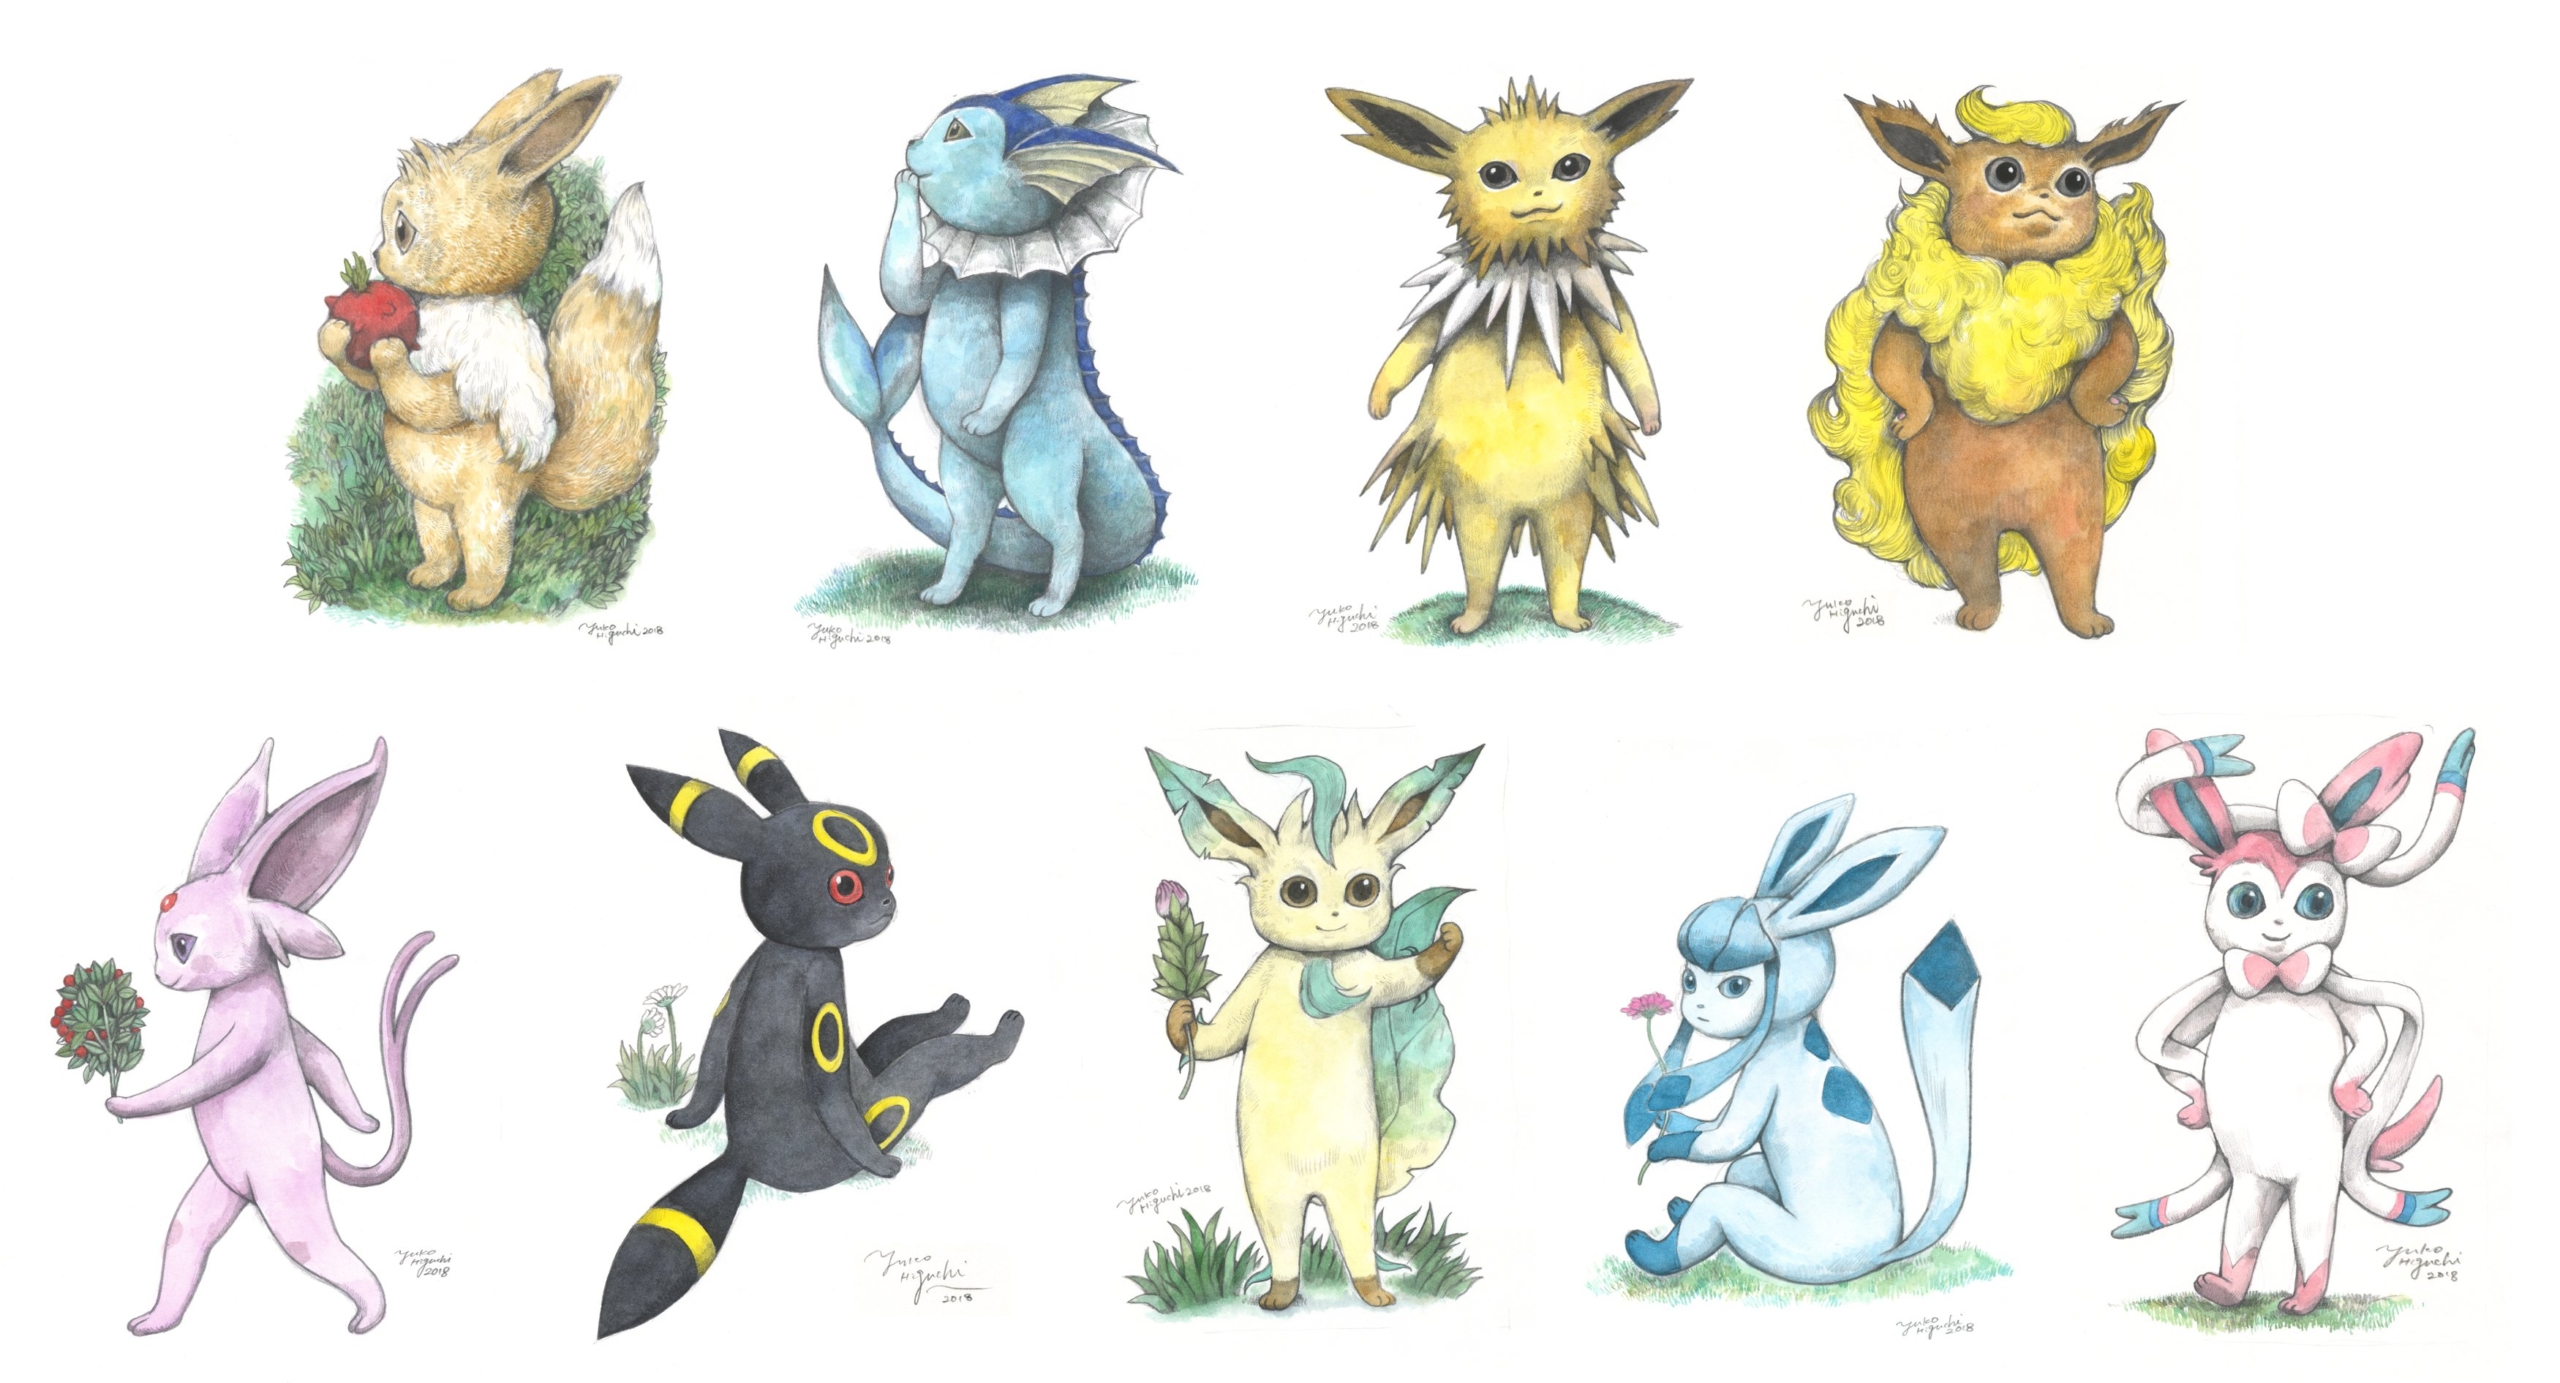 What Are The Different Eevee Evolutions? Vaporeon, Flareon, And Jolteon  Aren't The Only Ones